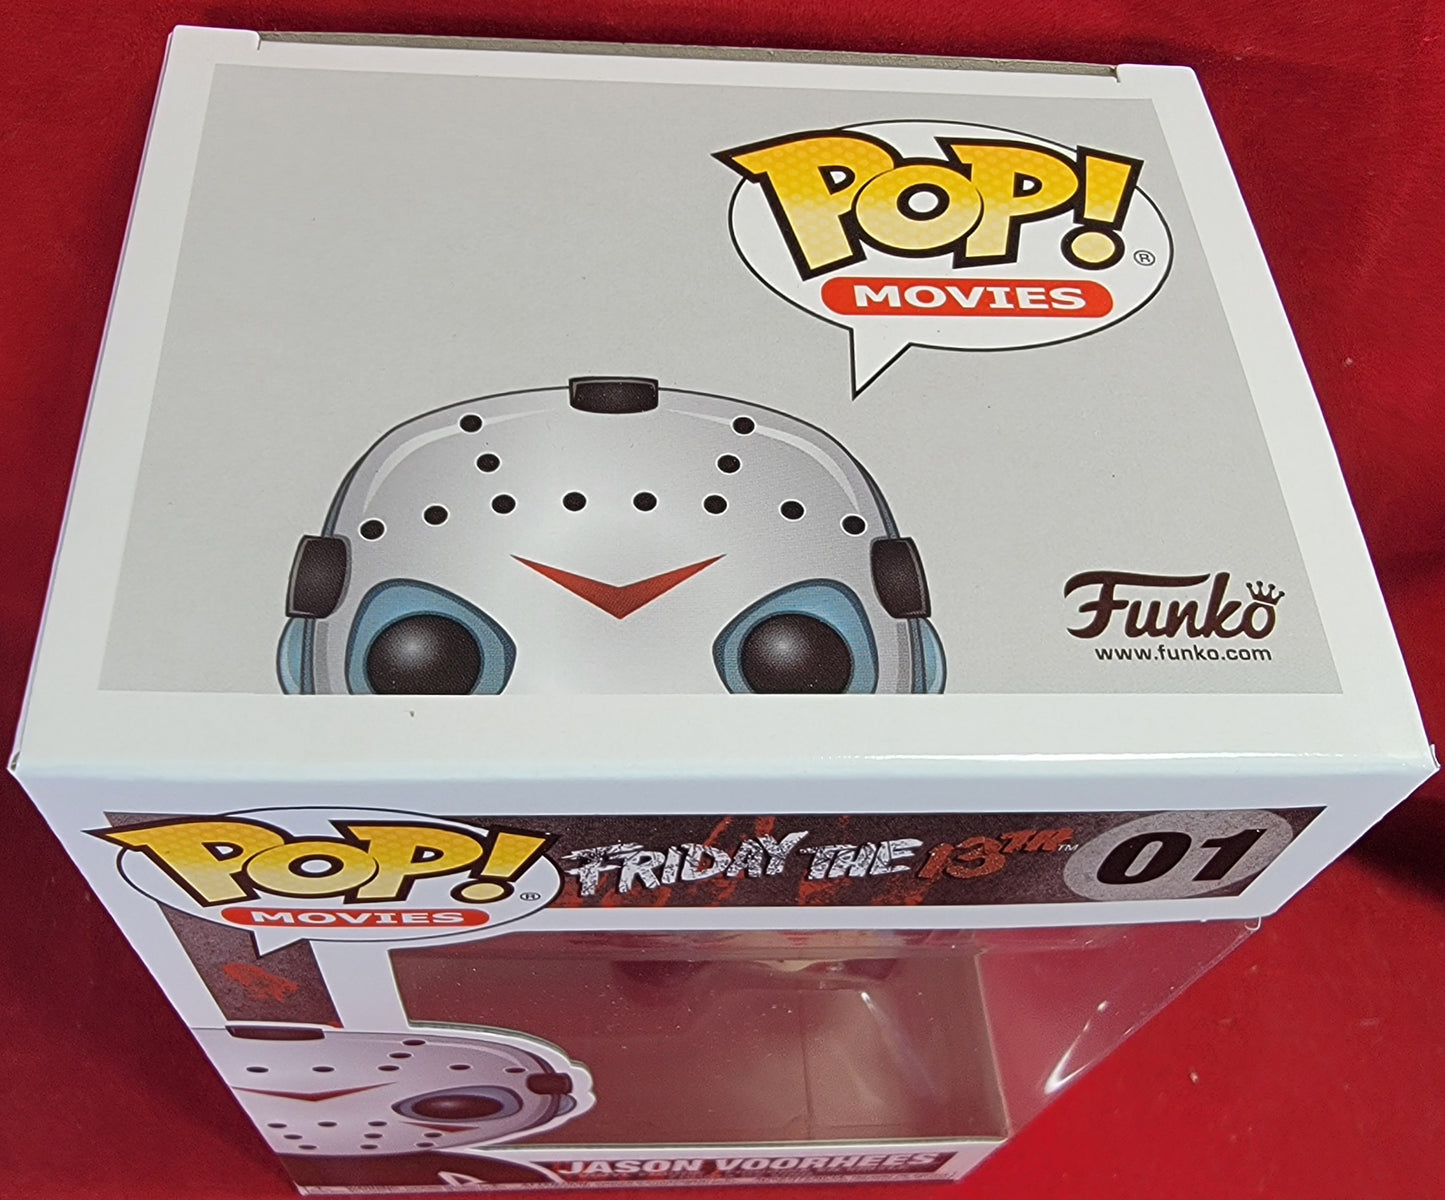 Jason voorhees funko 01 Friday the 13th